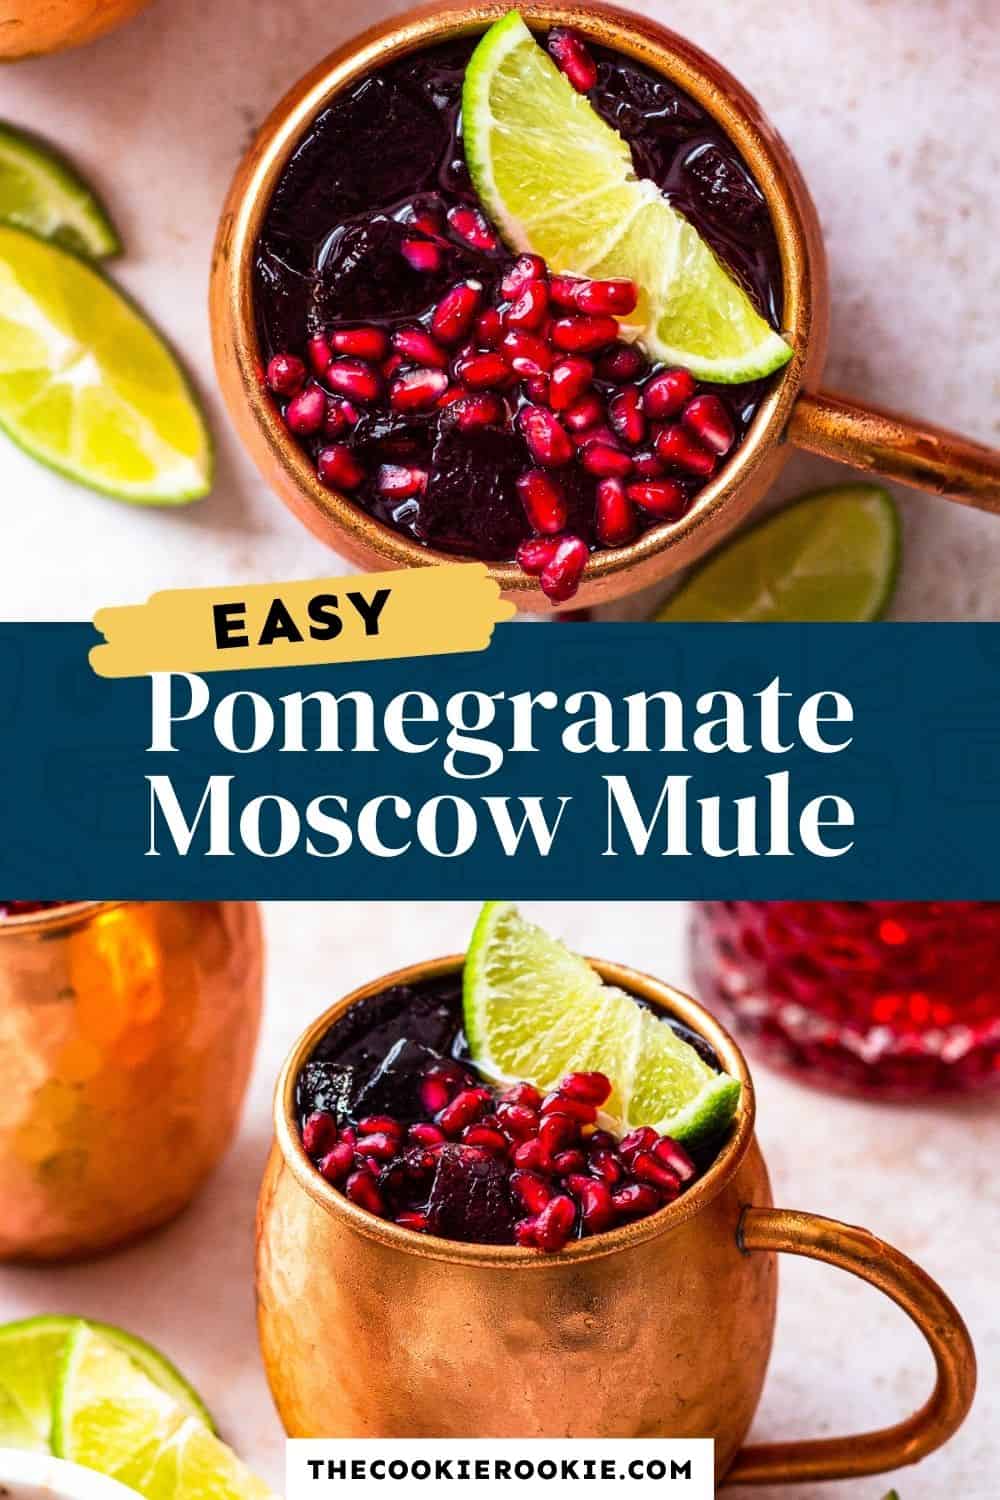 Pomegranate Moscow Mule Recipe - The Cookie Rookie®